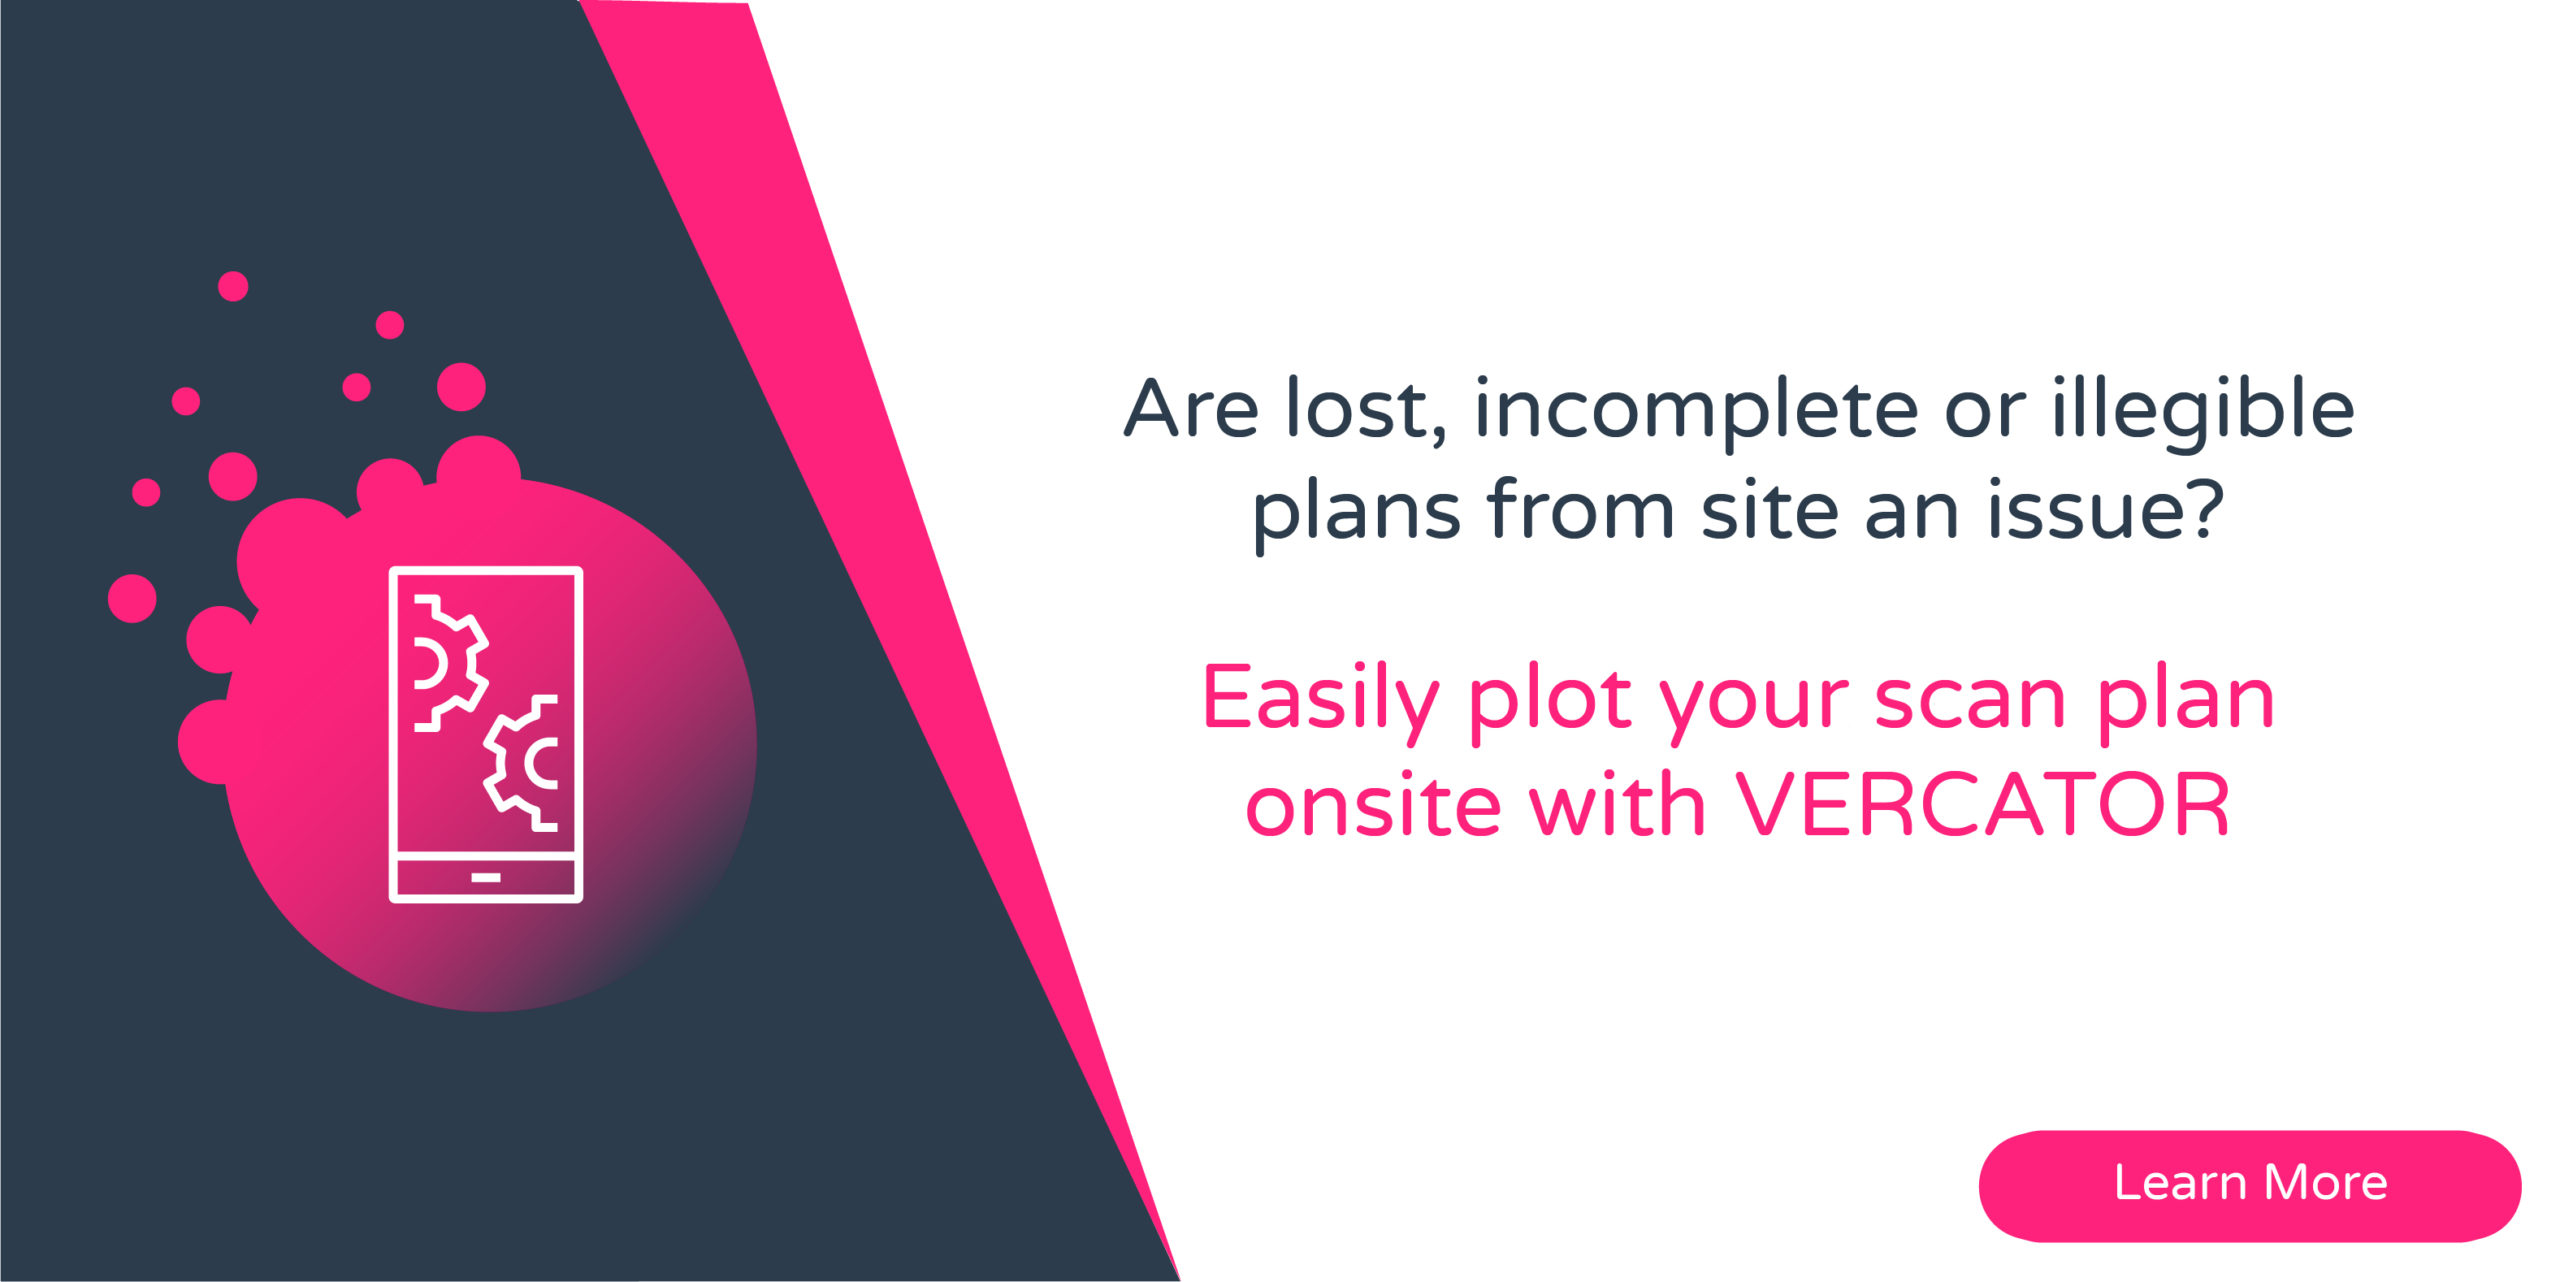 Easily plot your scan plan onsite with VERCATOR